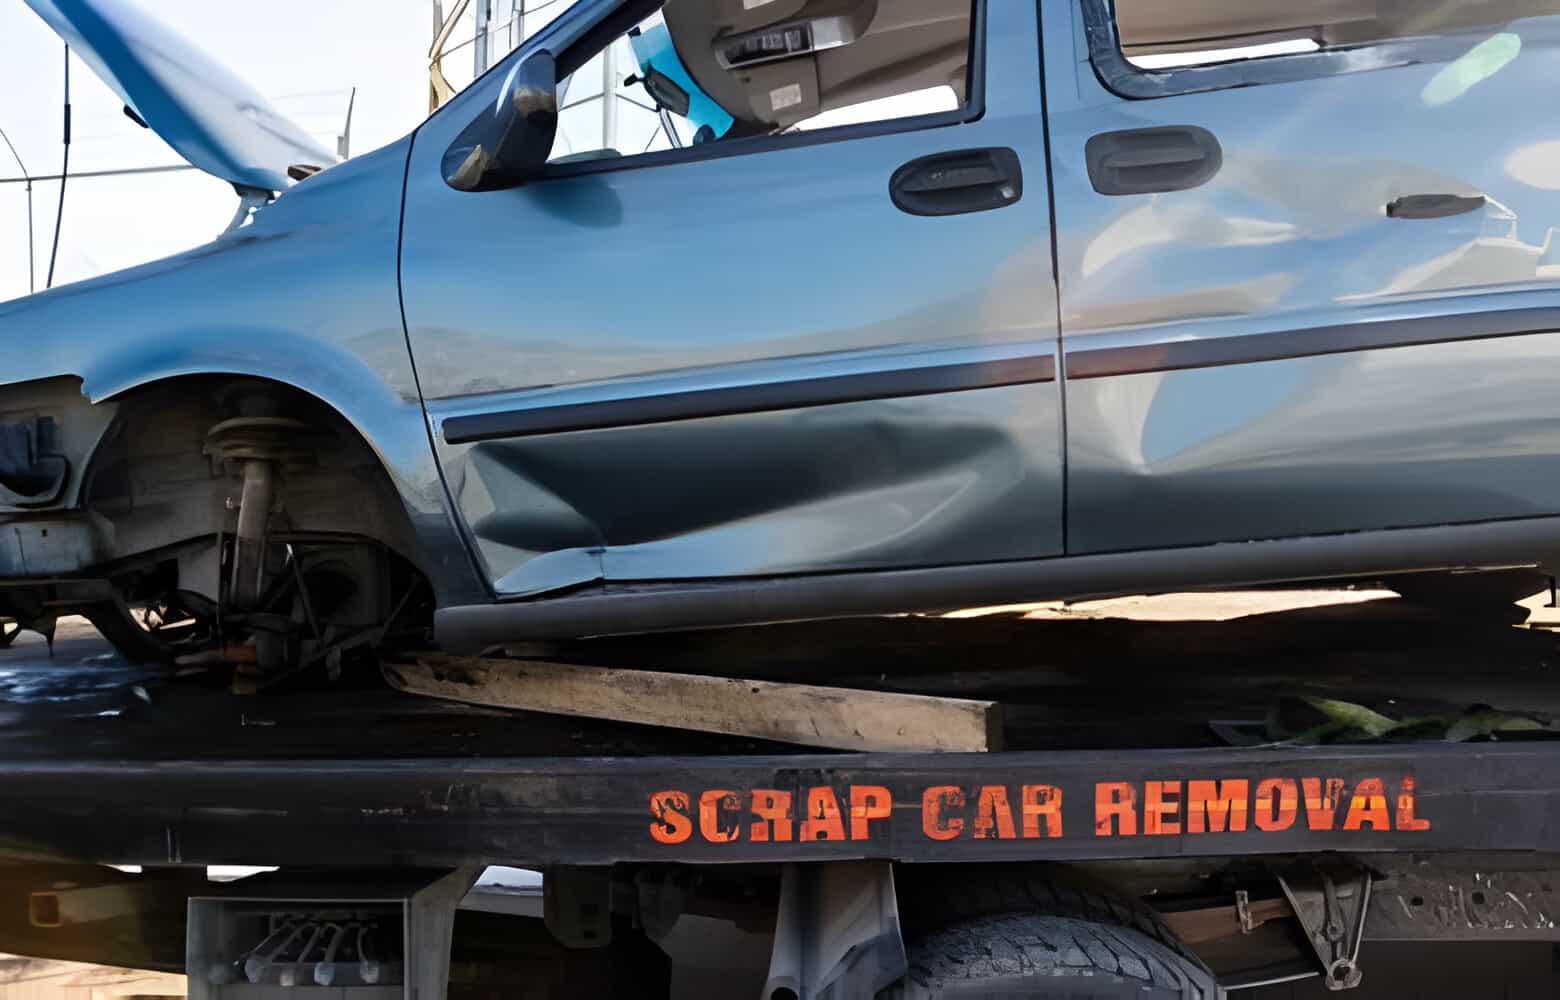 Premier car removals Brisbane: Turn Your Old Car into Cash Today